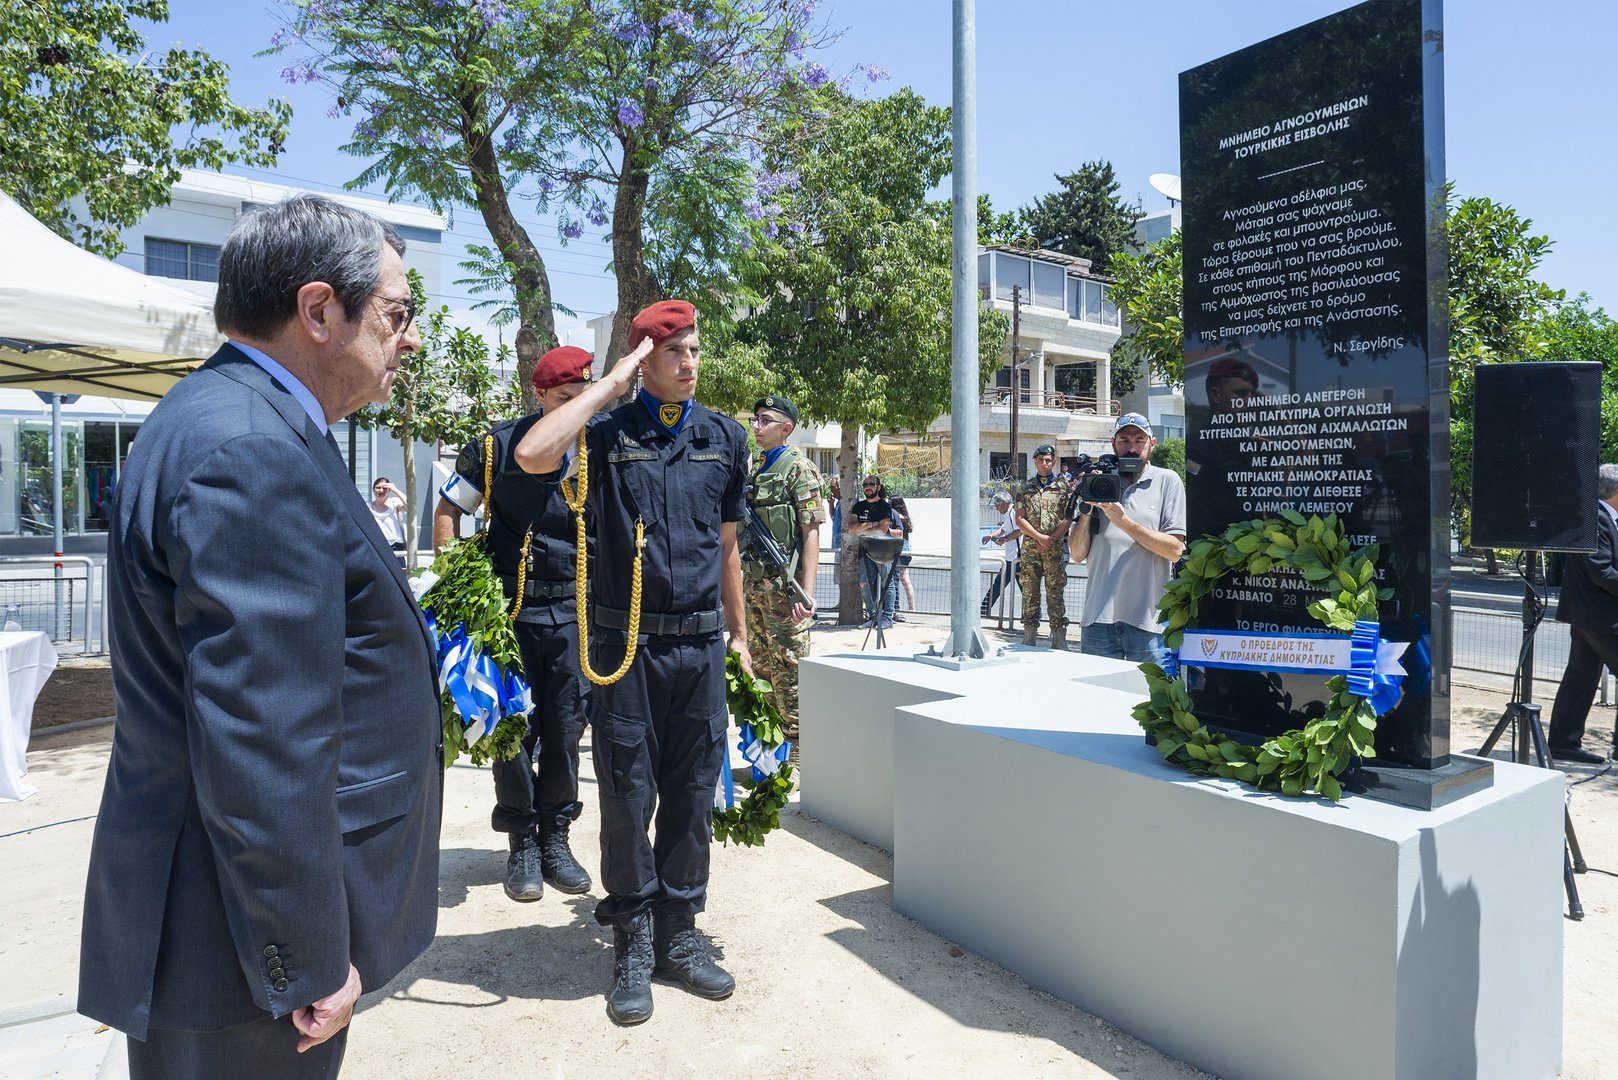 image Anastasiades: We will not stop petitioning the EU and UN to act on Turkey